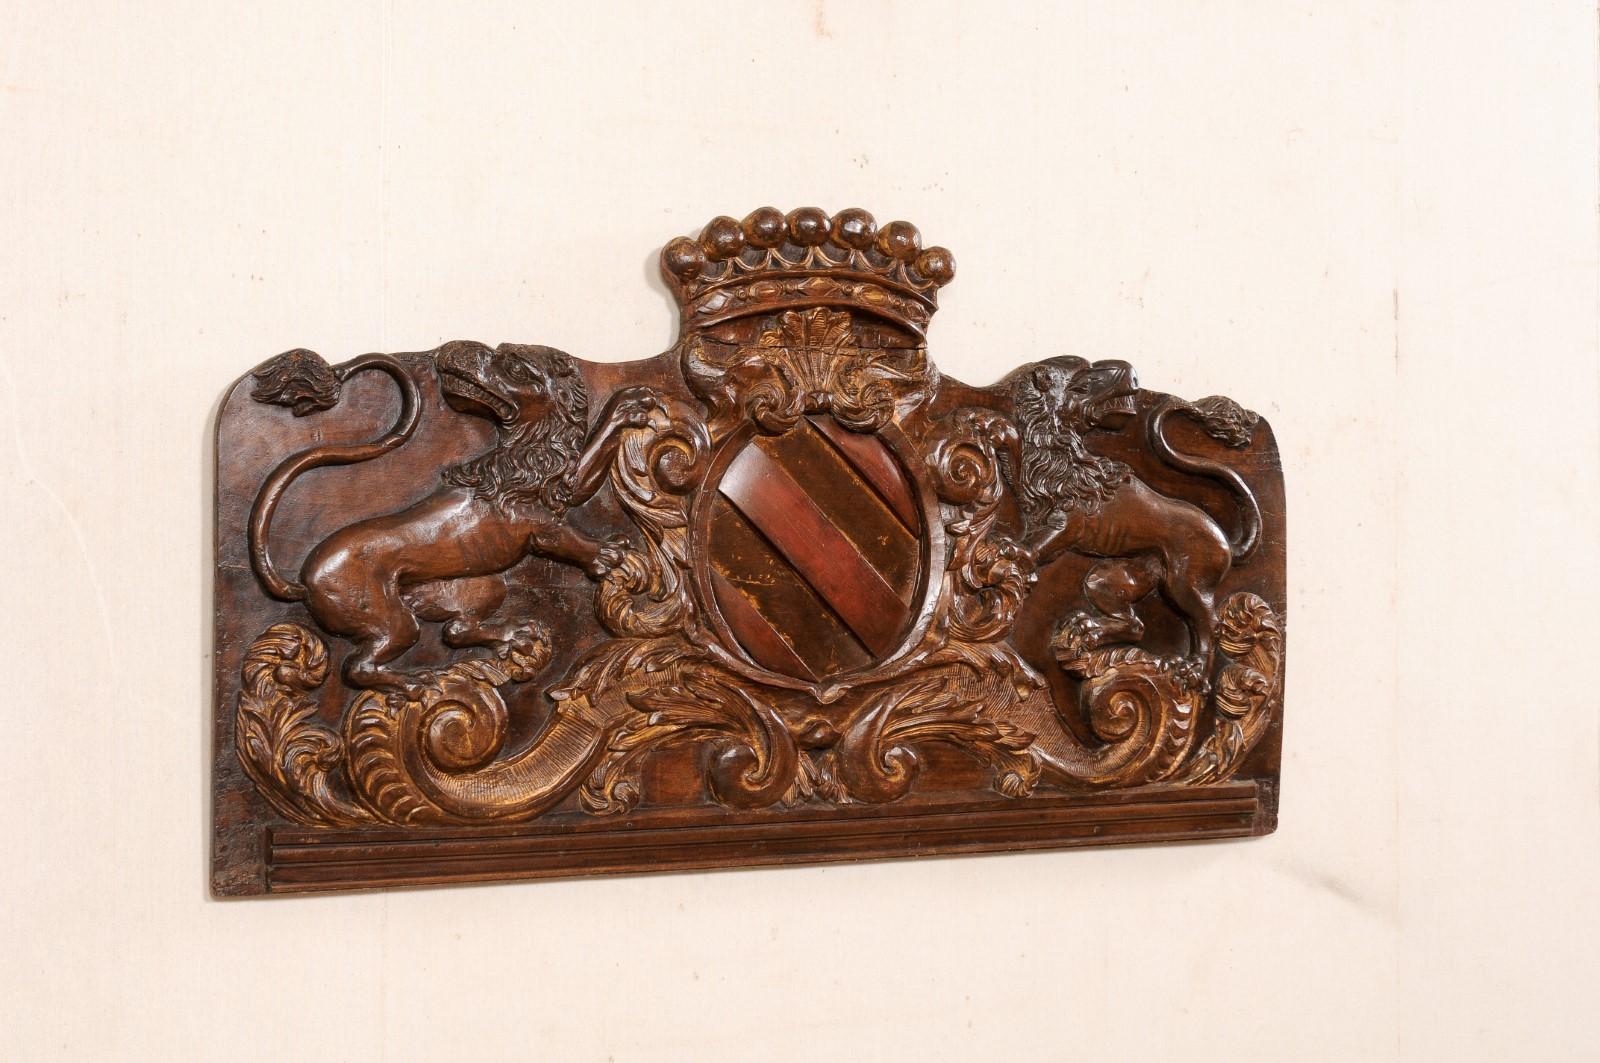 18th Century French Heraldry Motif Carved-Wood Wall Panel In Good Condition For Sale In Atlanta, GA